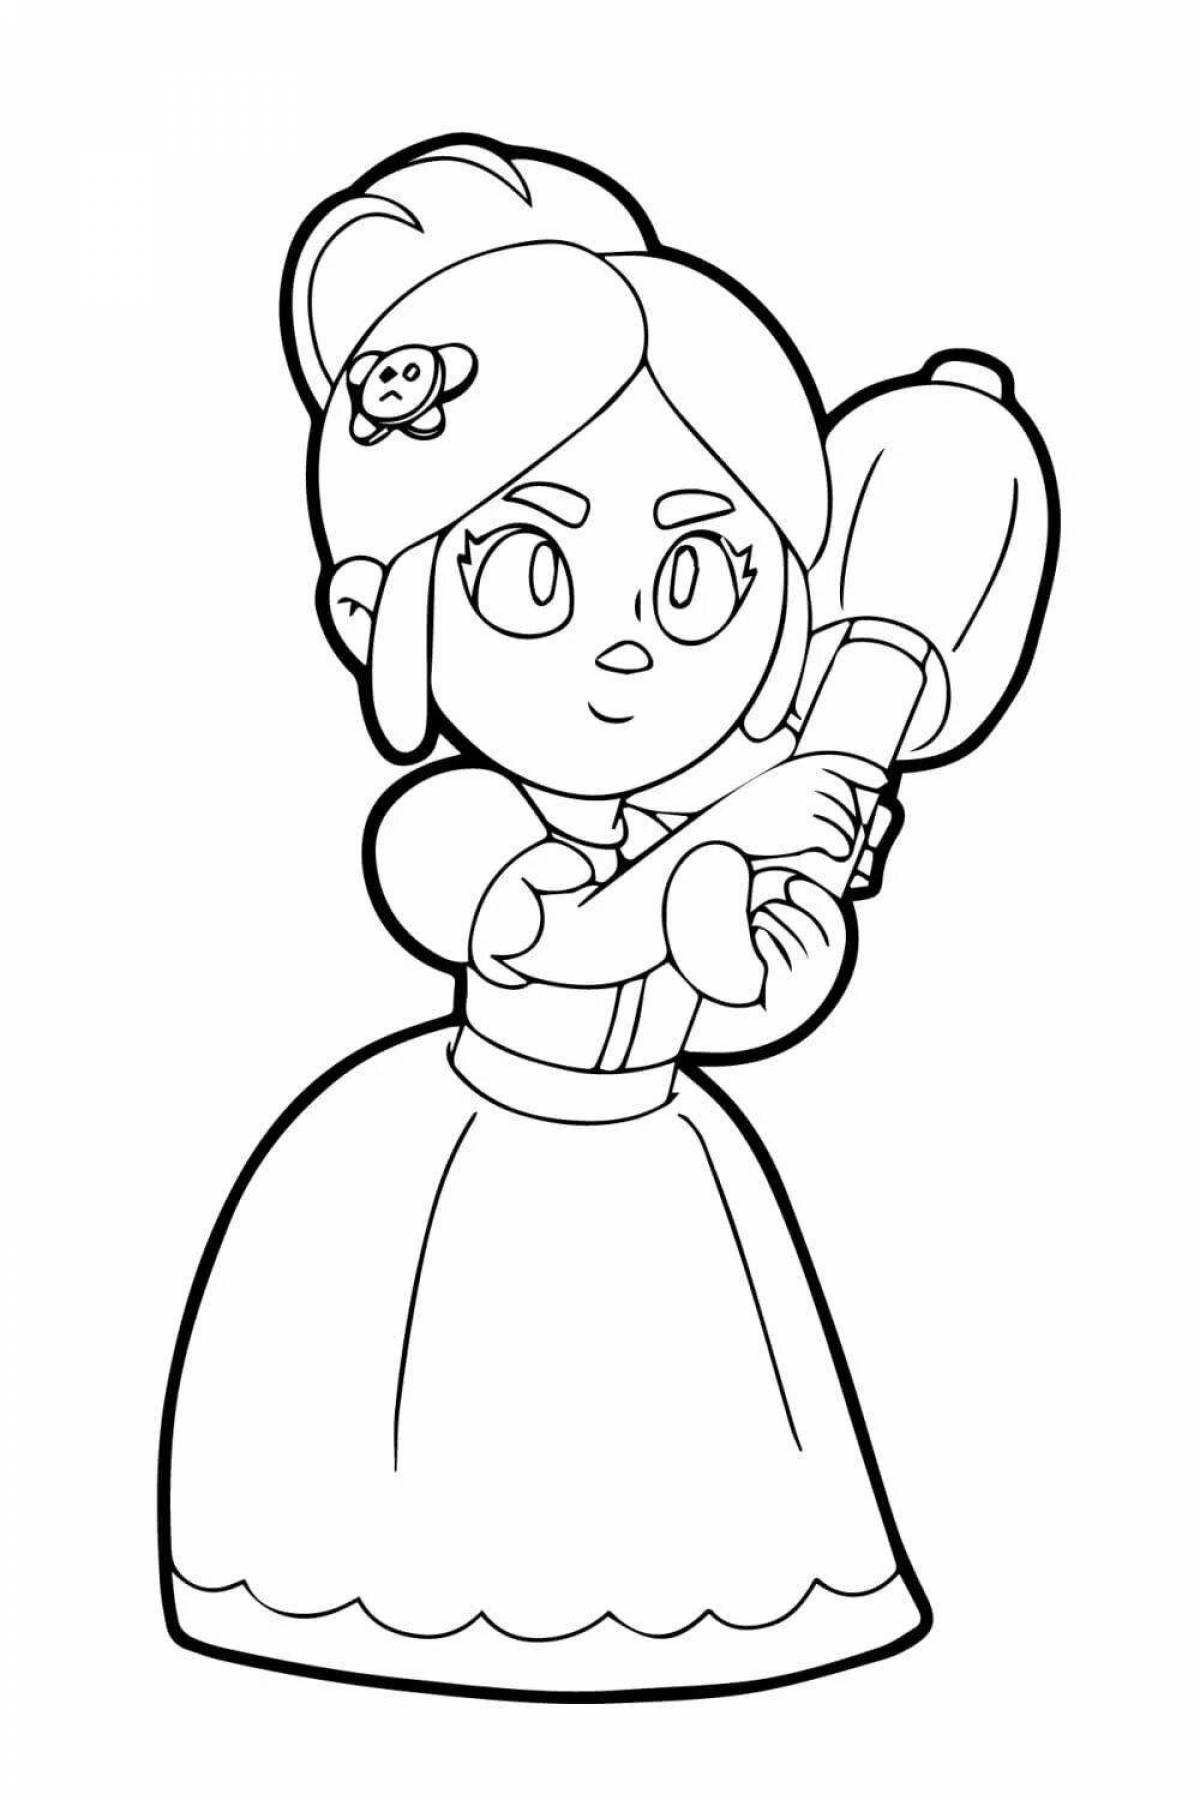 Coloring page balanced piper